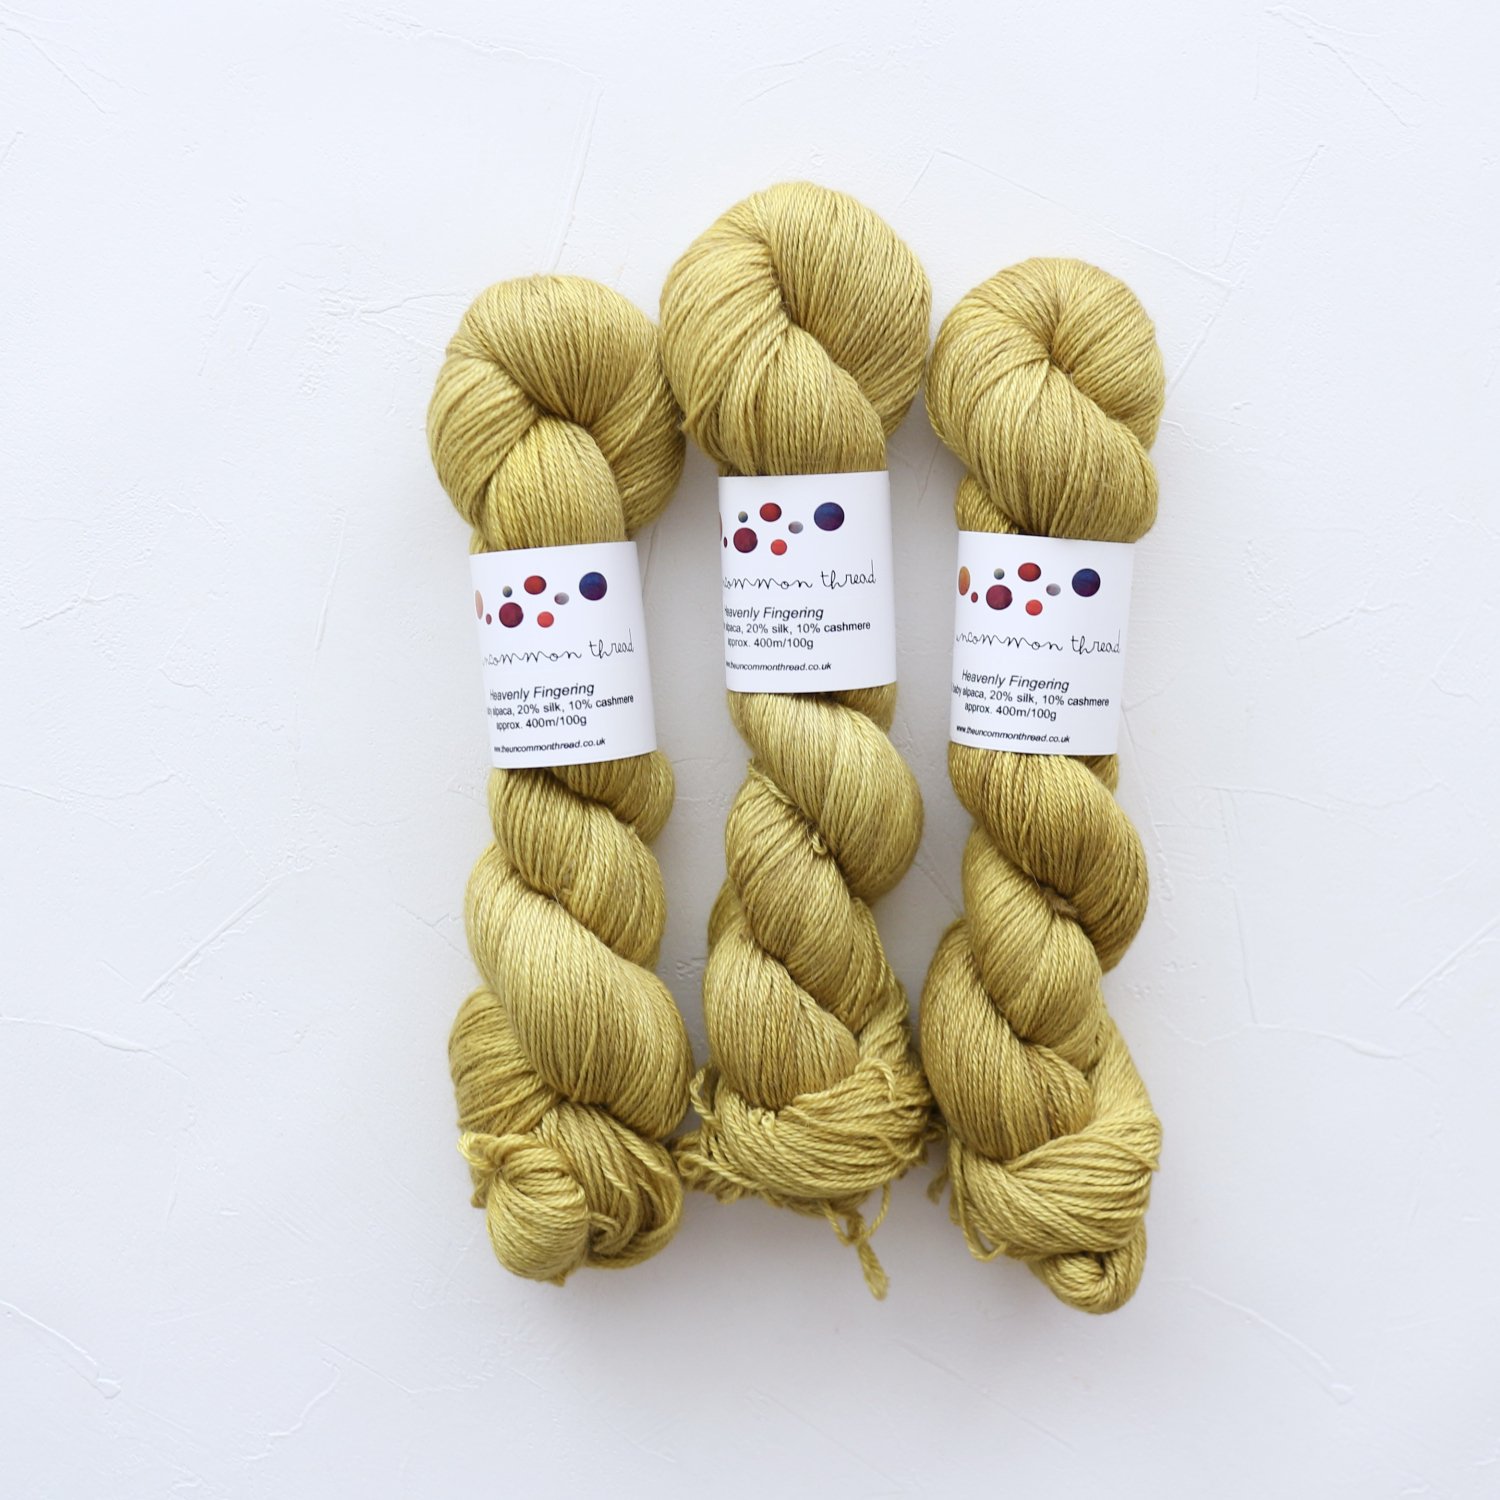 【The Uncommon Thread】<br>Heavenly Fingering<br>Meadow Grass